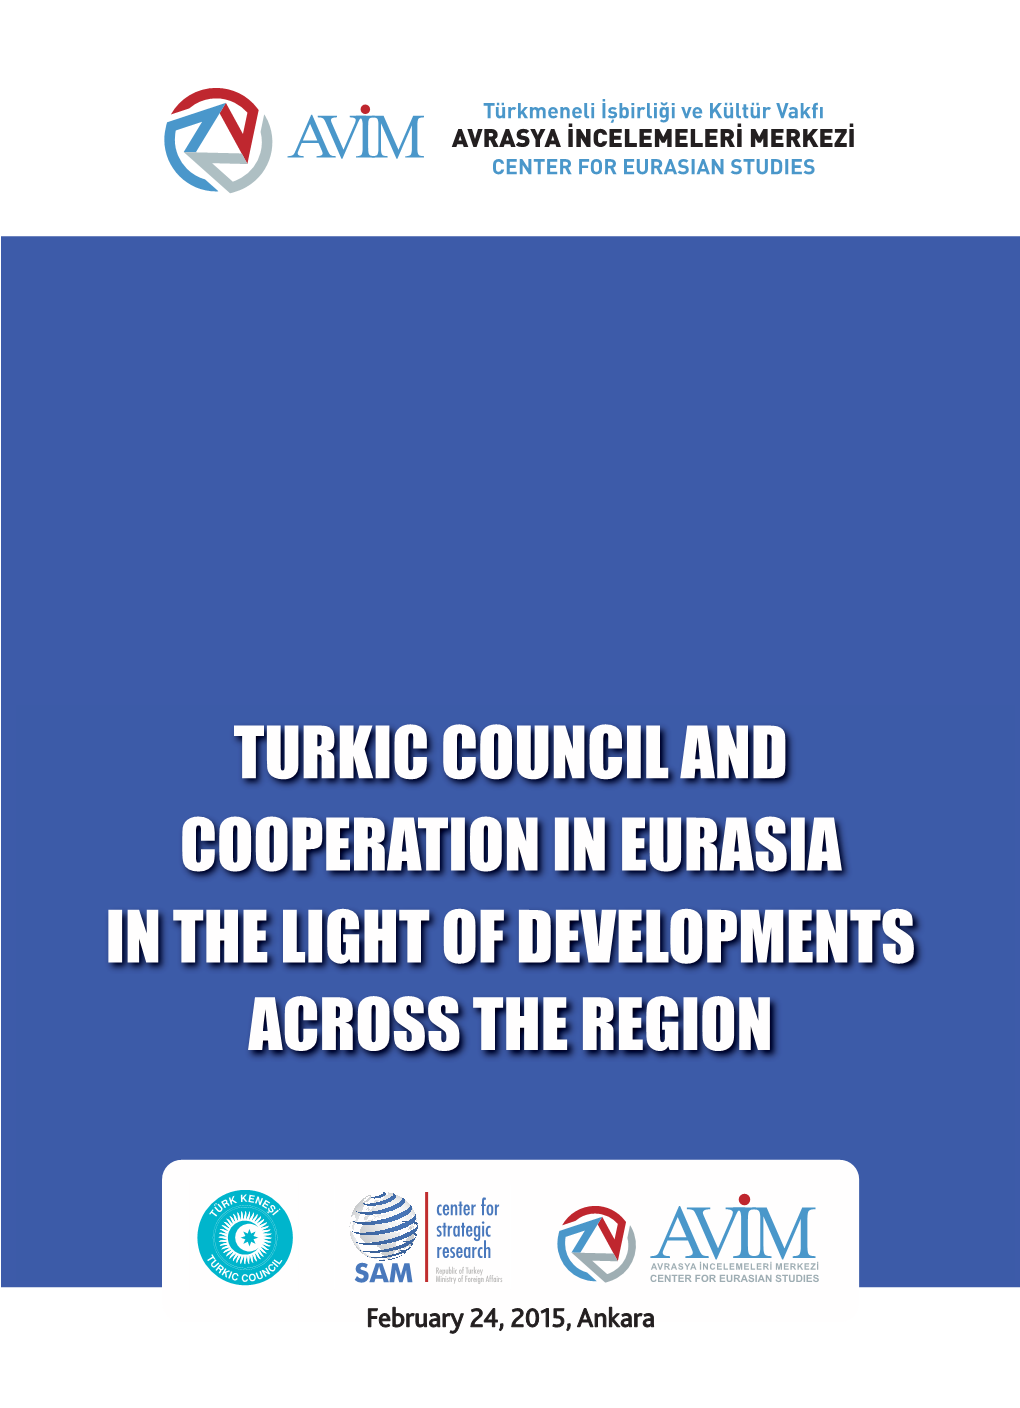 Turkic Council and Cooperation in Eurasia in the Light of Developments Across the Region